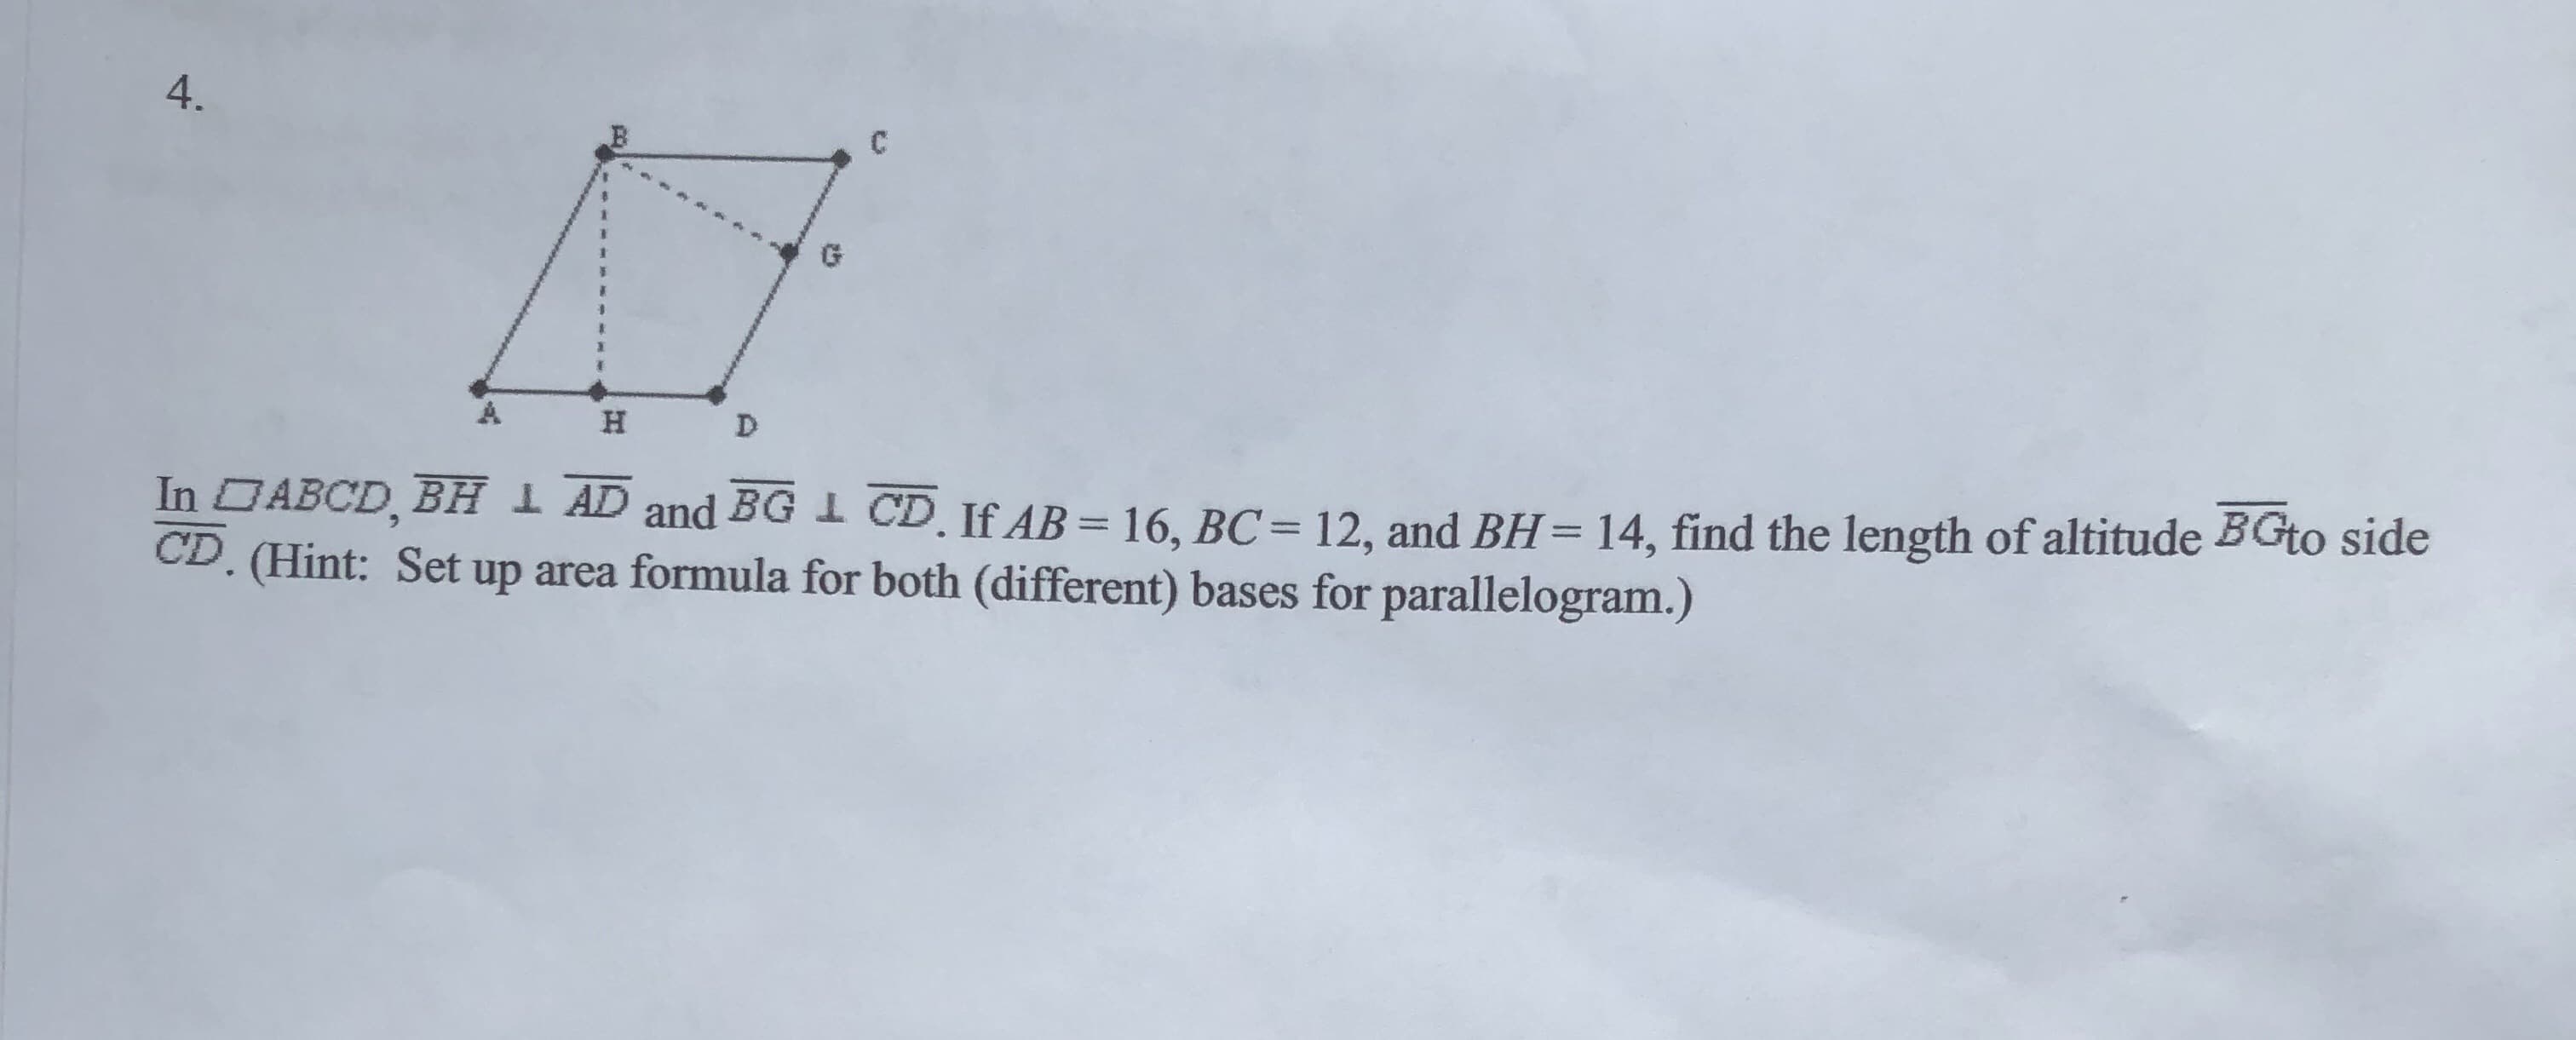 4.
D
H
12, and BH= 14, find the length of altitude BGto side
CD. If AB 16, BC
up area formula for both (different) bases for parallelogram.)
In ABCD, BH
CD. (Hint: Set
AD and BG
